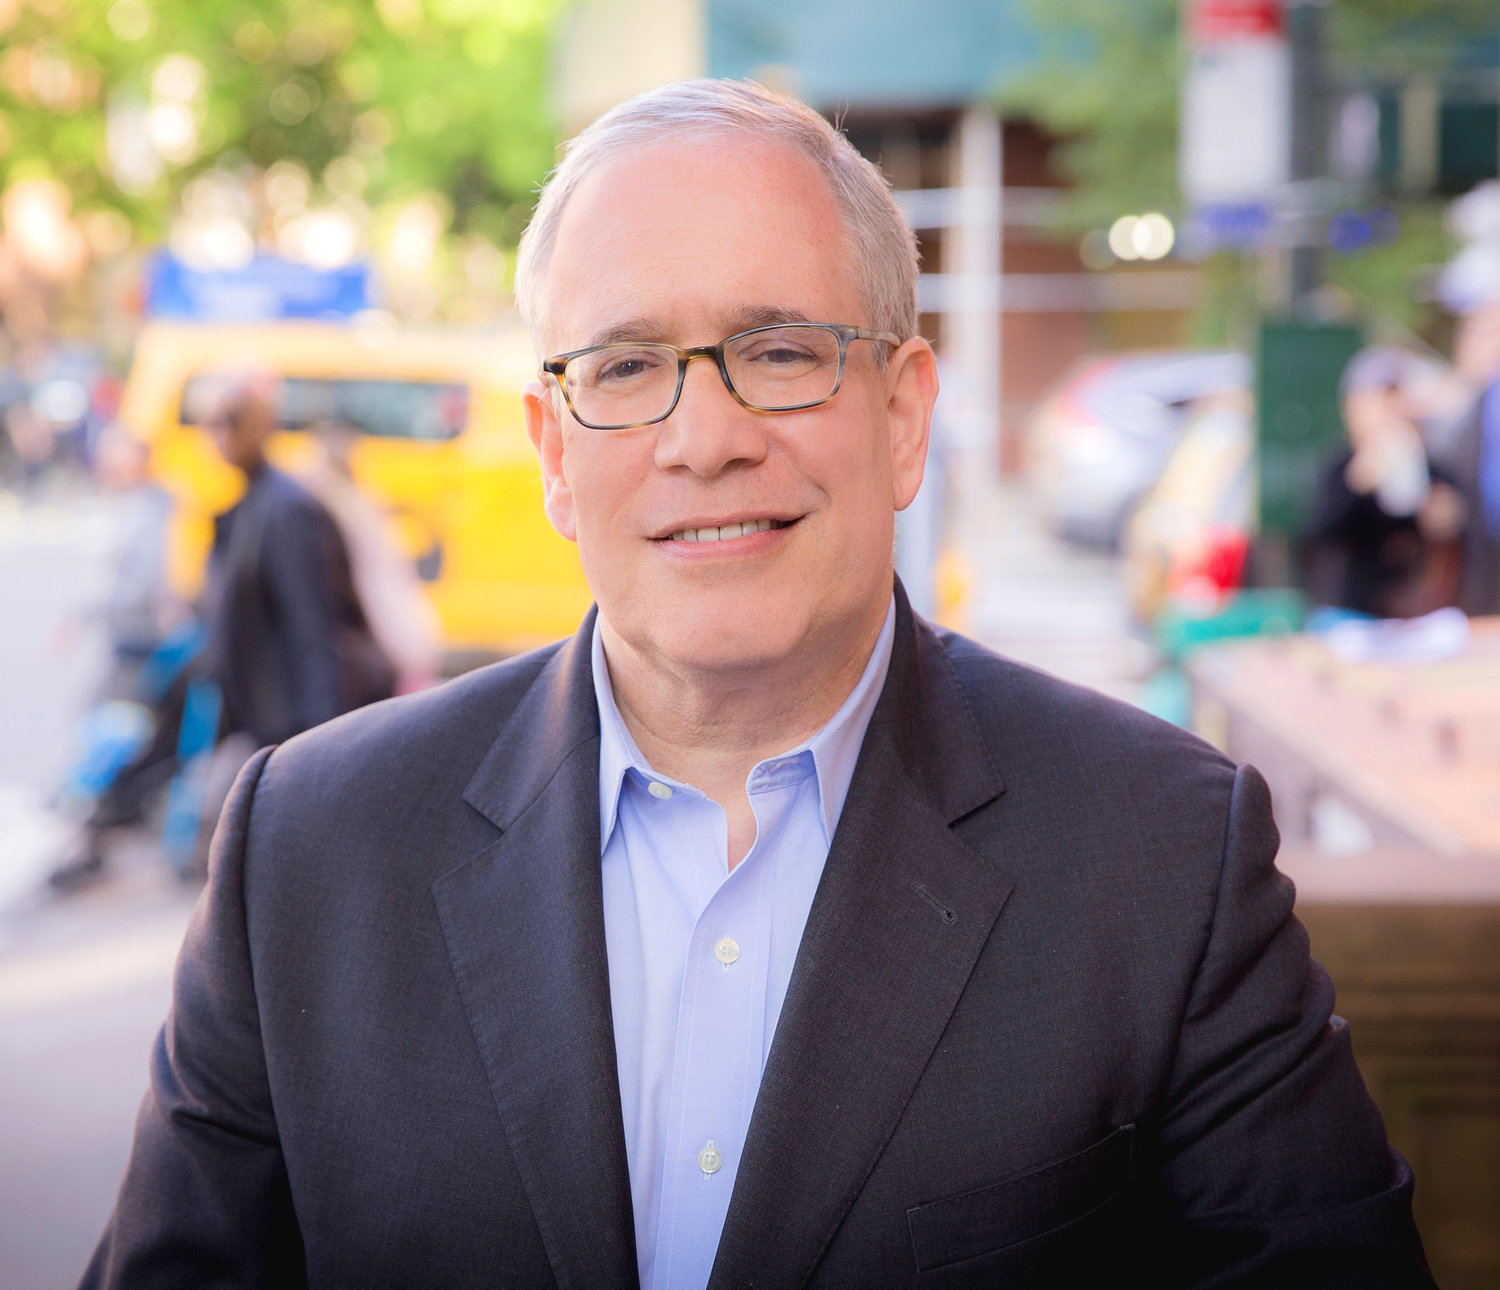 Scott Stringer, who is one of the first people to officially throw his hat in the ring for the 2021 mayoral race, grew up in Washington Heights, but has some significant family connections to Riverdale.